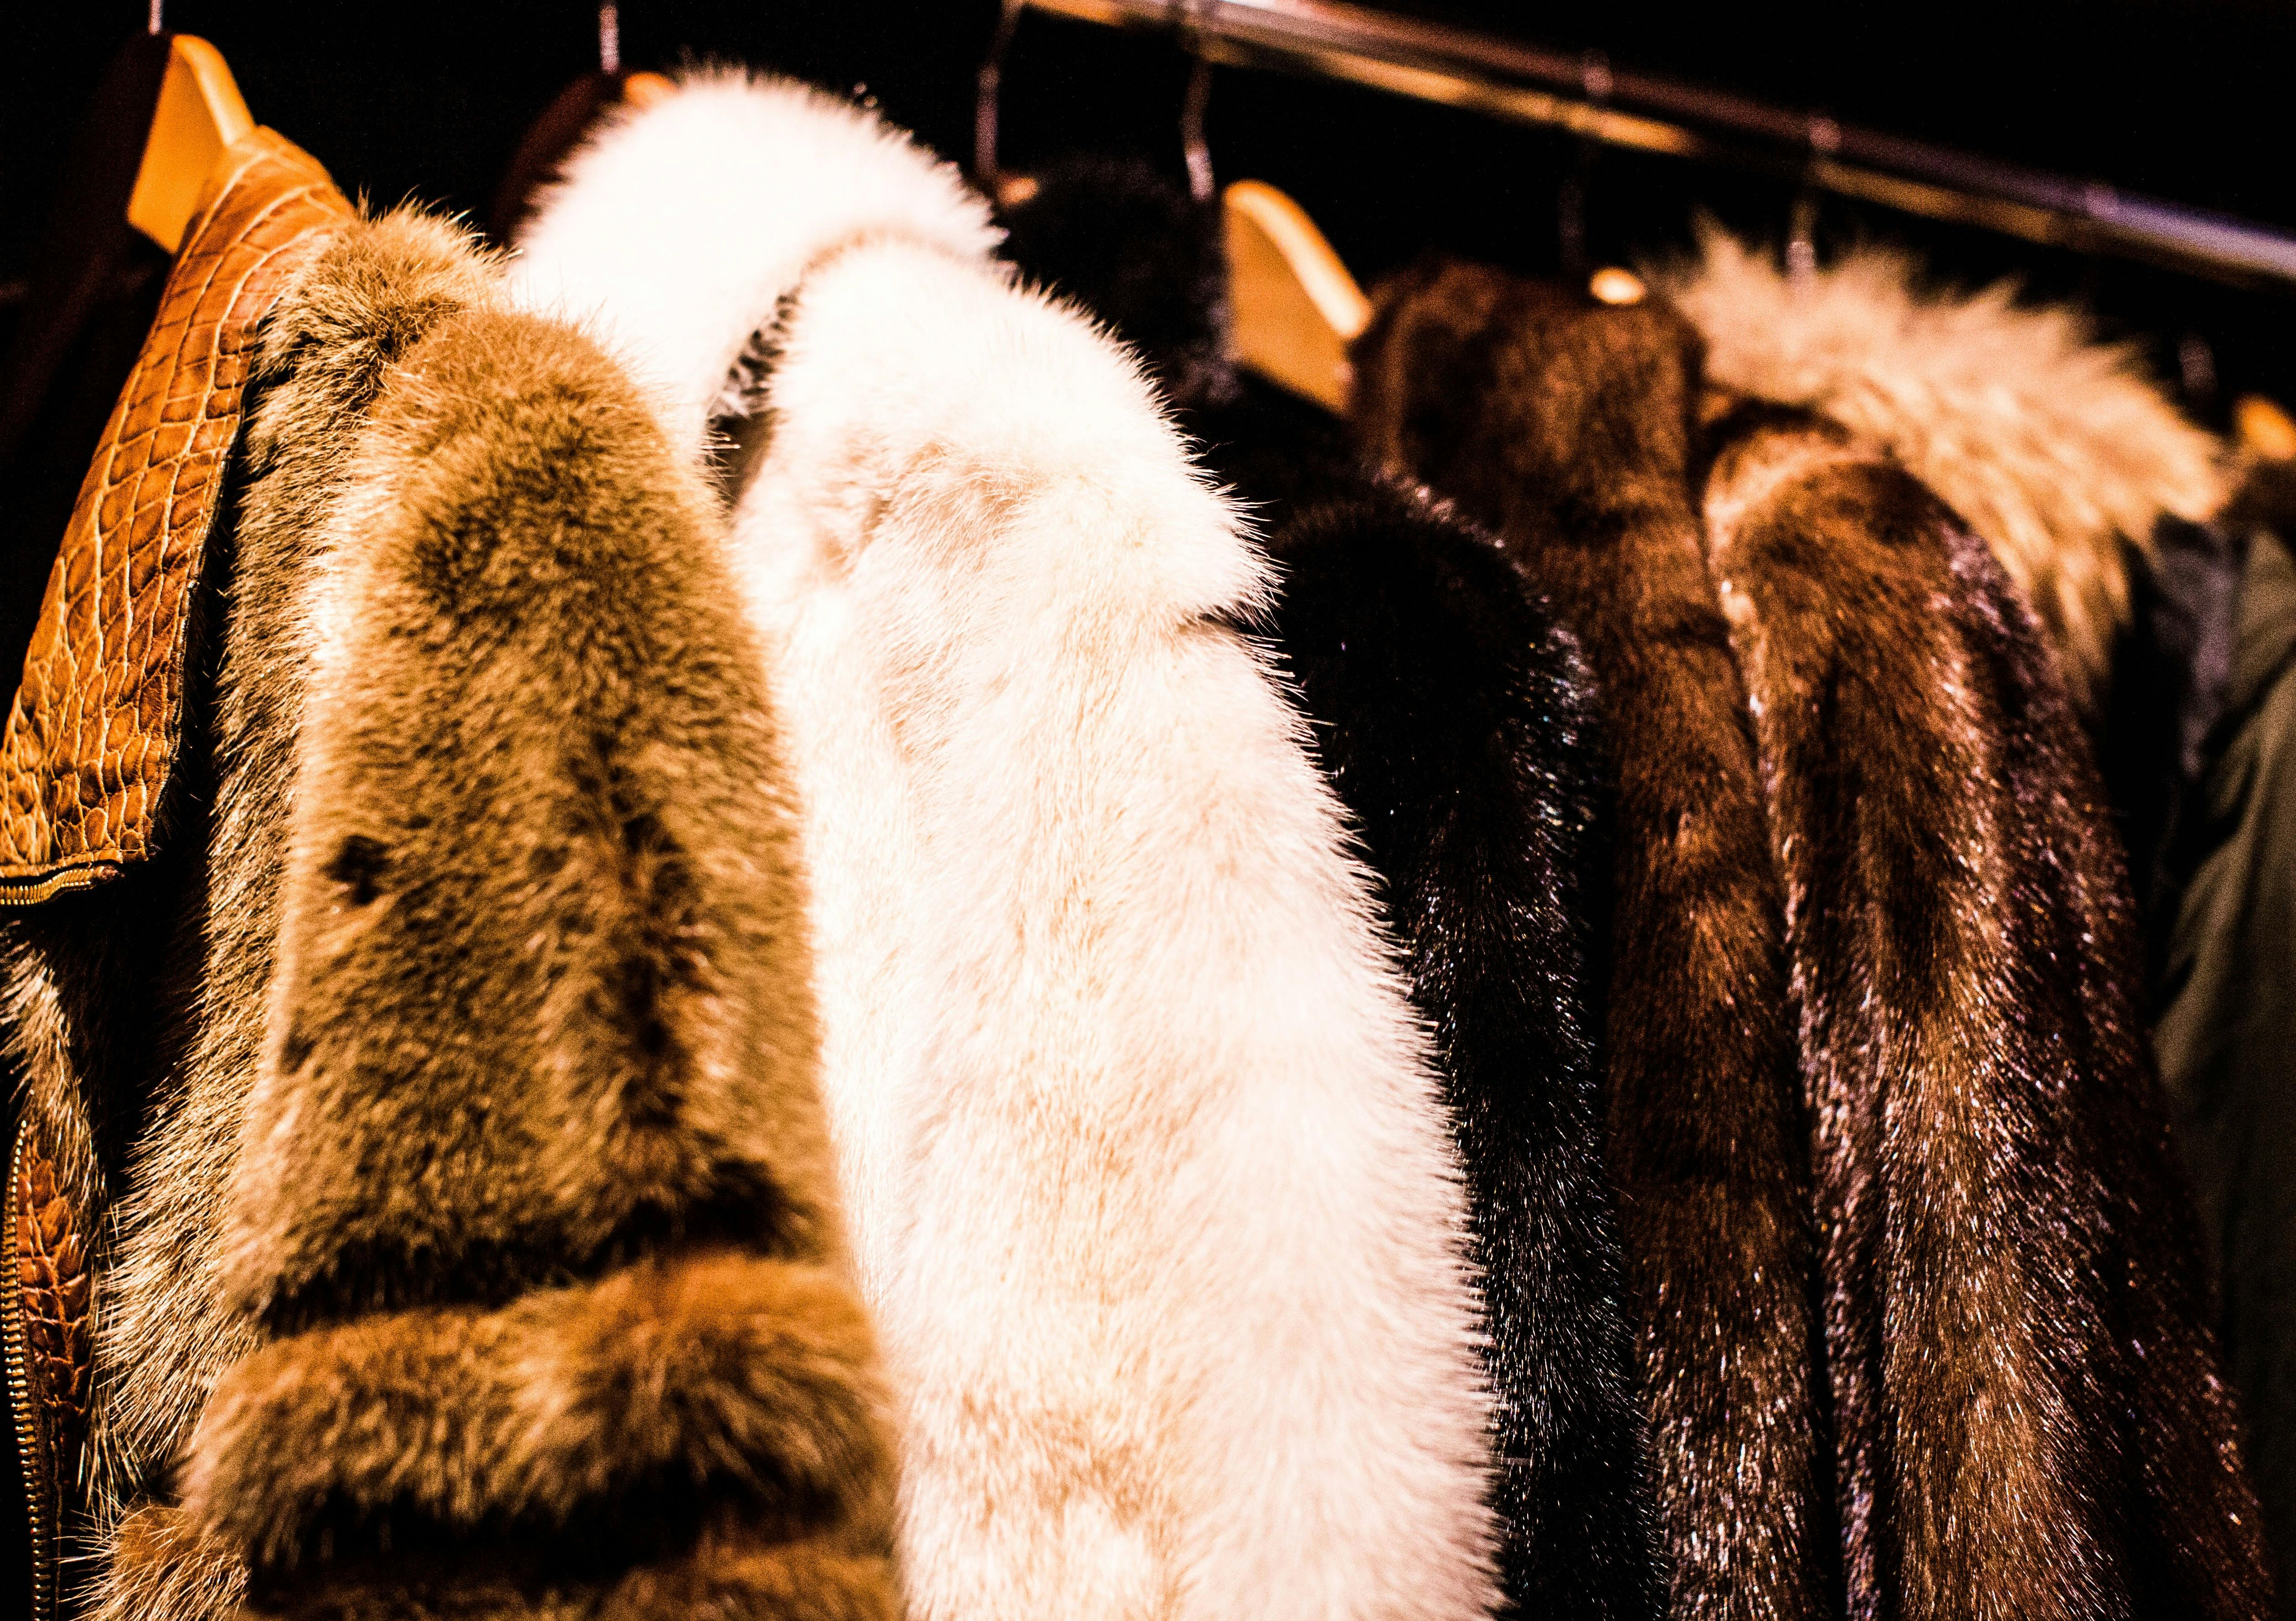 How To Value Vintage Furs, How To Identify A Real Mink Coat Worth In Royale High